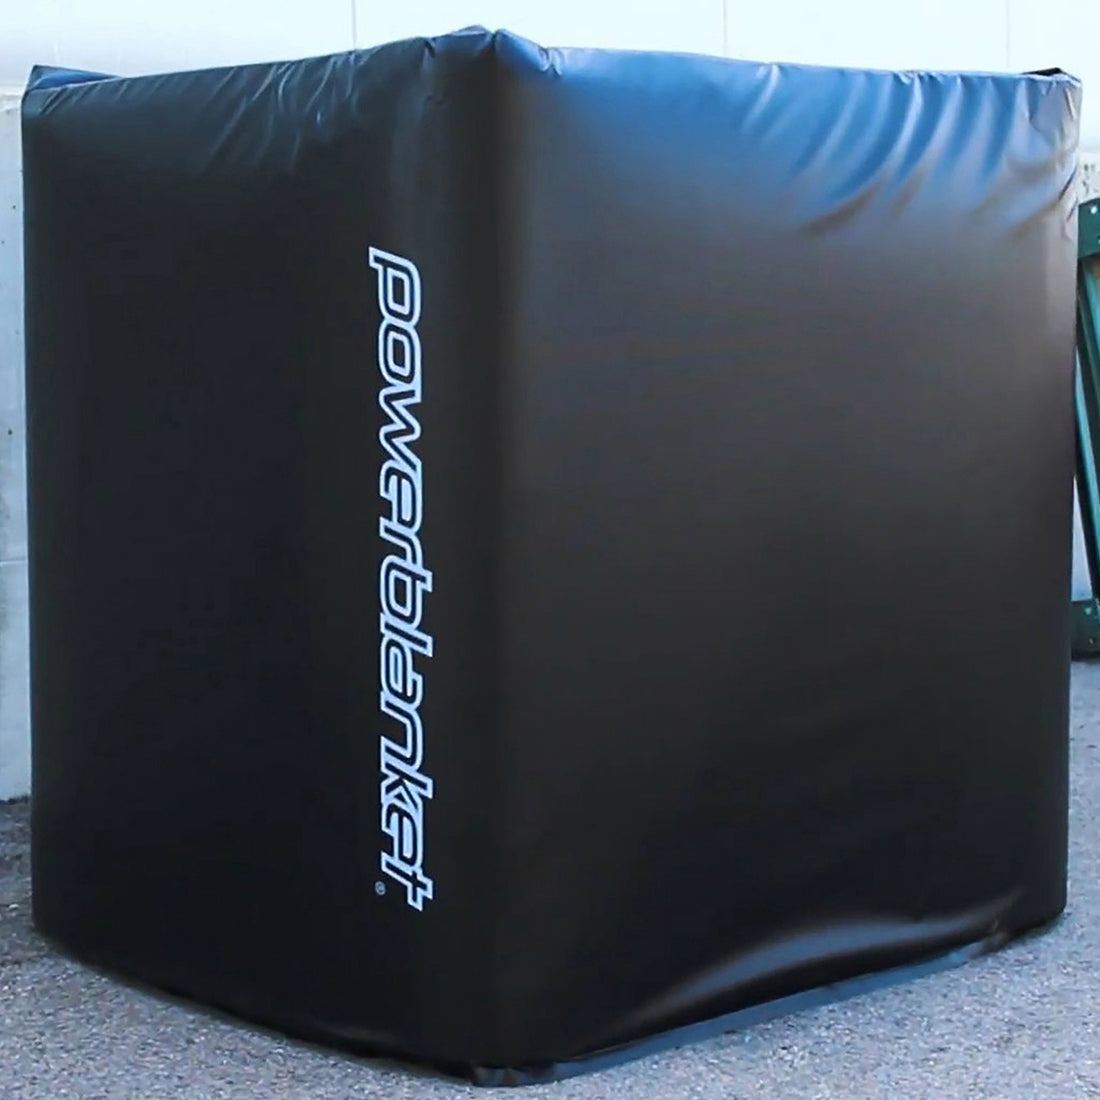 Covers that Do More: Choosing Insulated vs Heated IBC Tote Covers